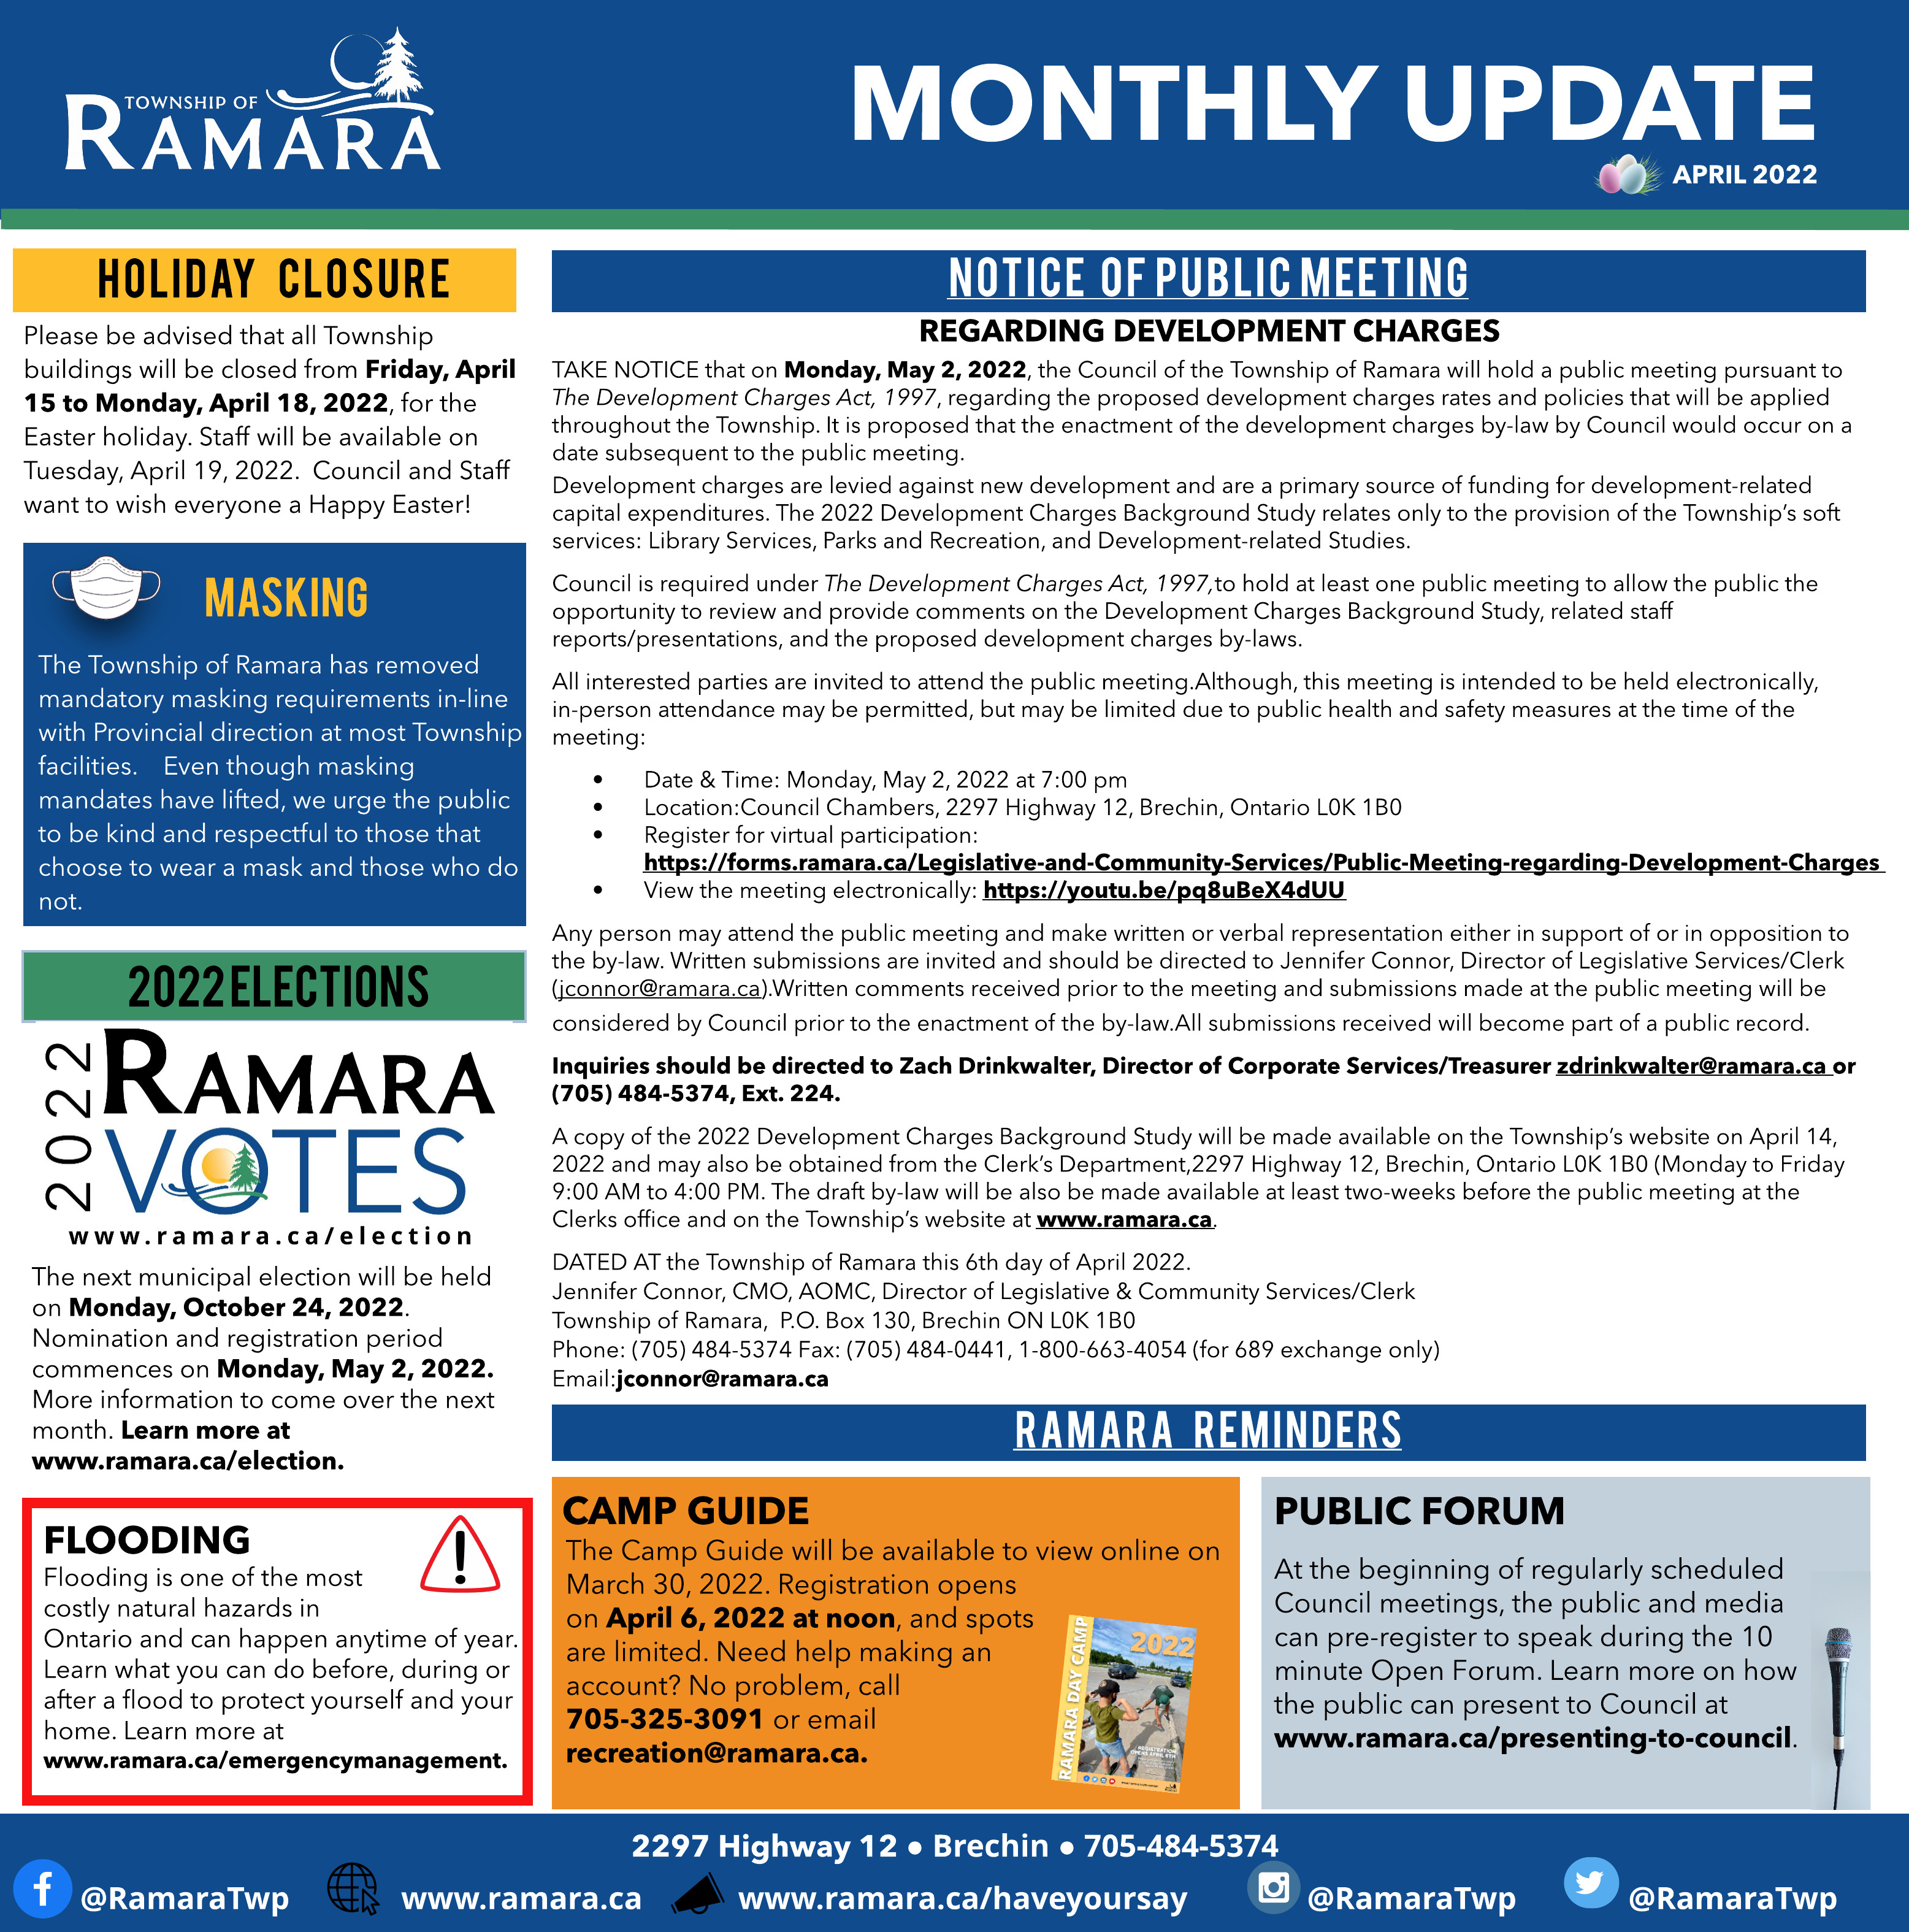 April edition of the Ramara Bulletin that lists all the news and important updates for Ramara Township. 